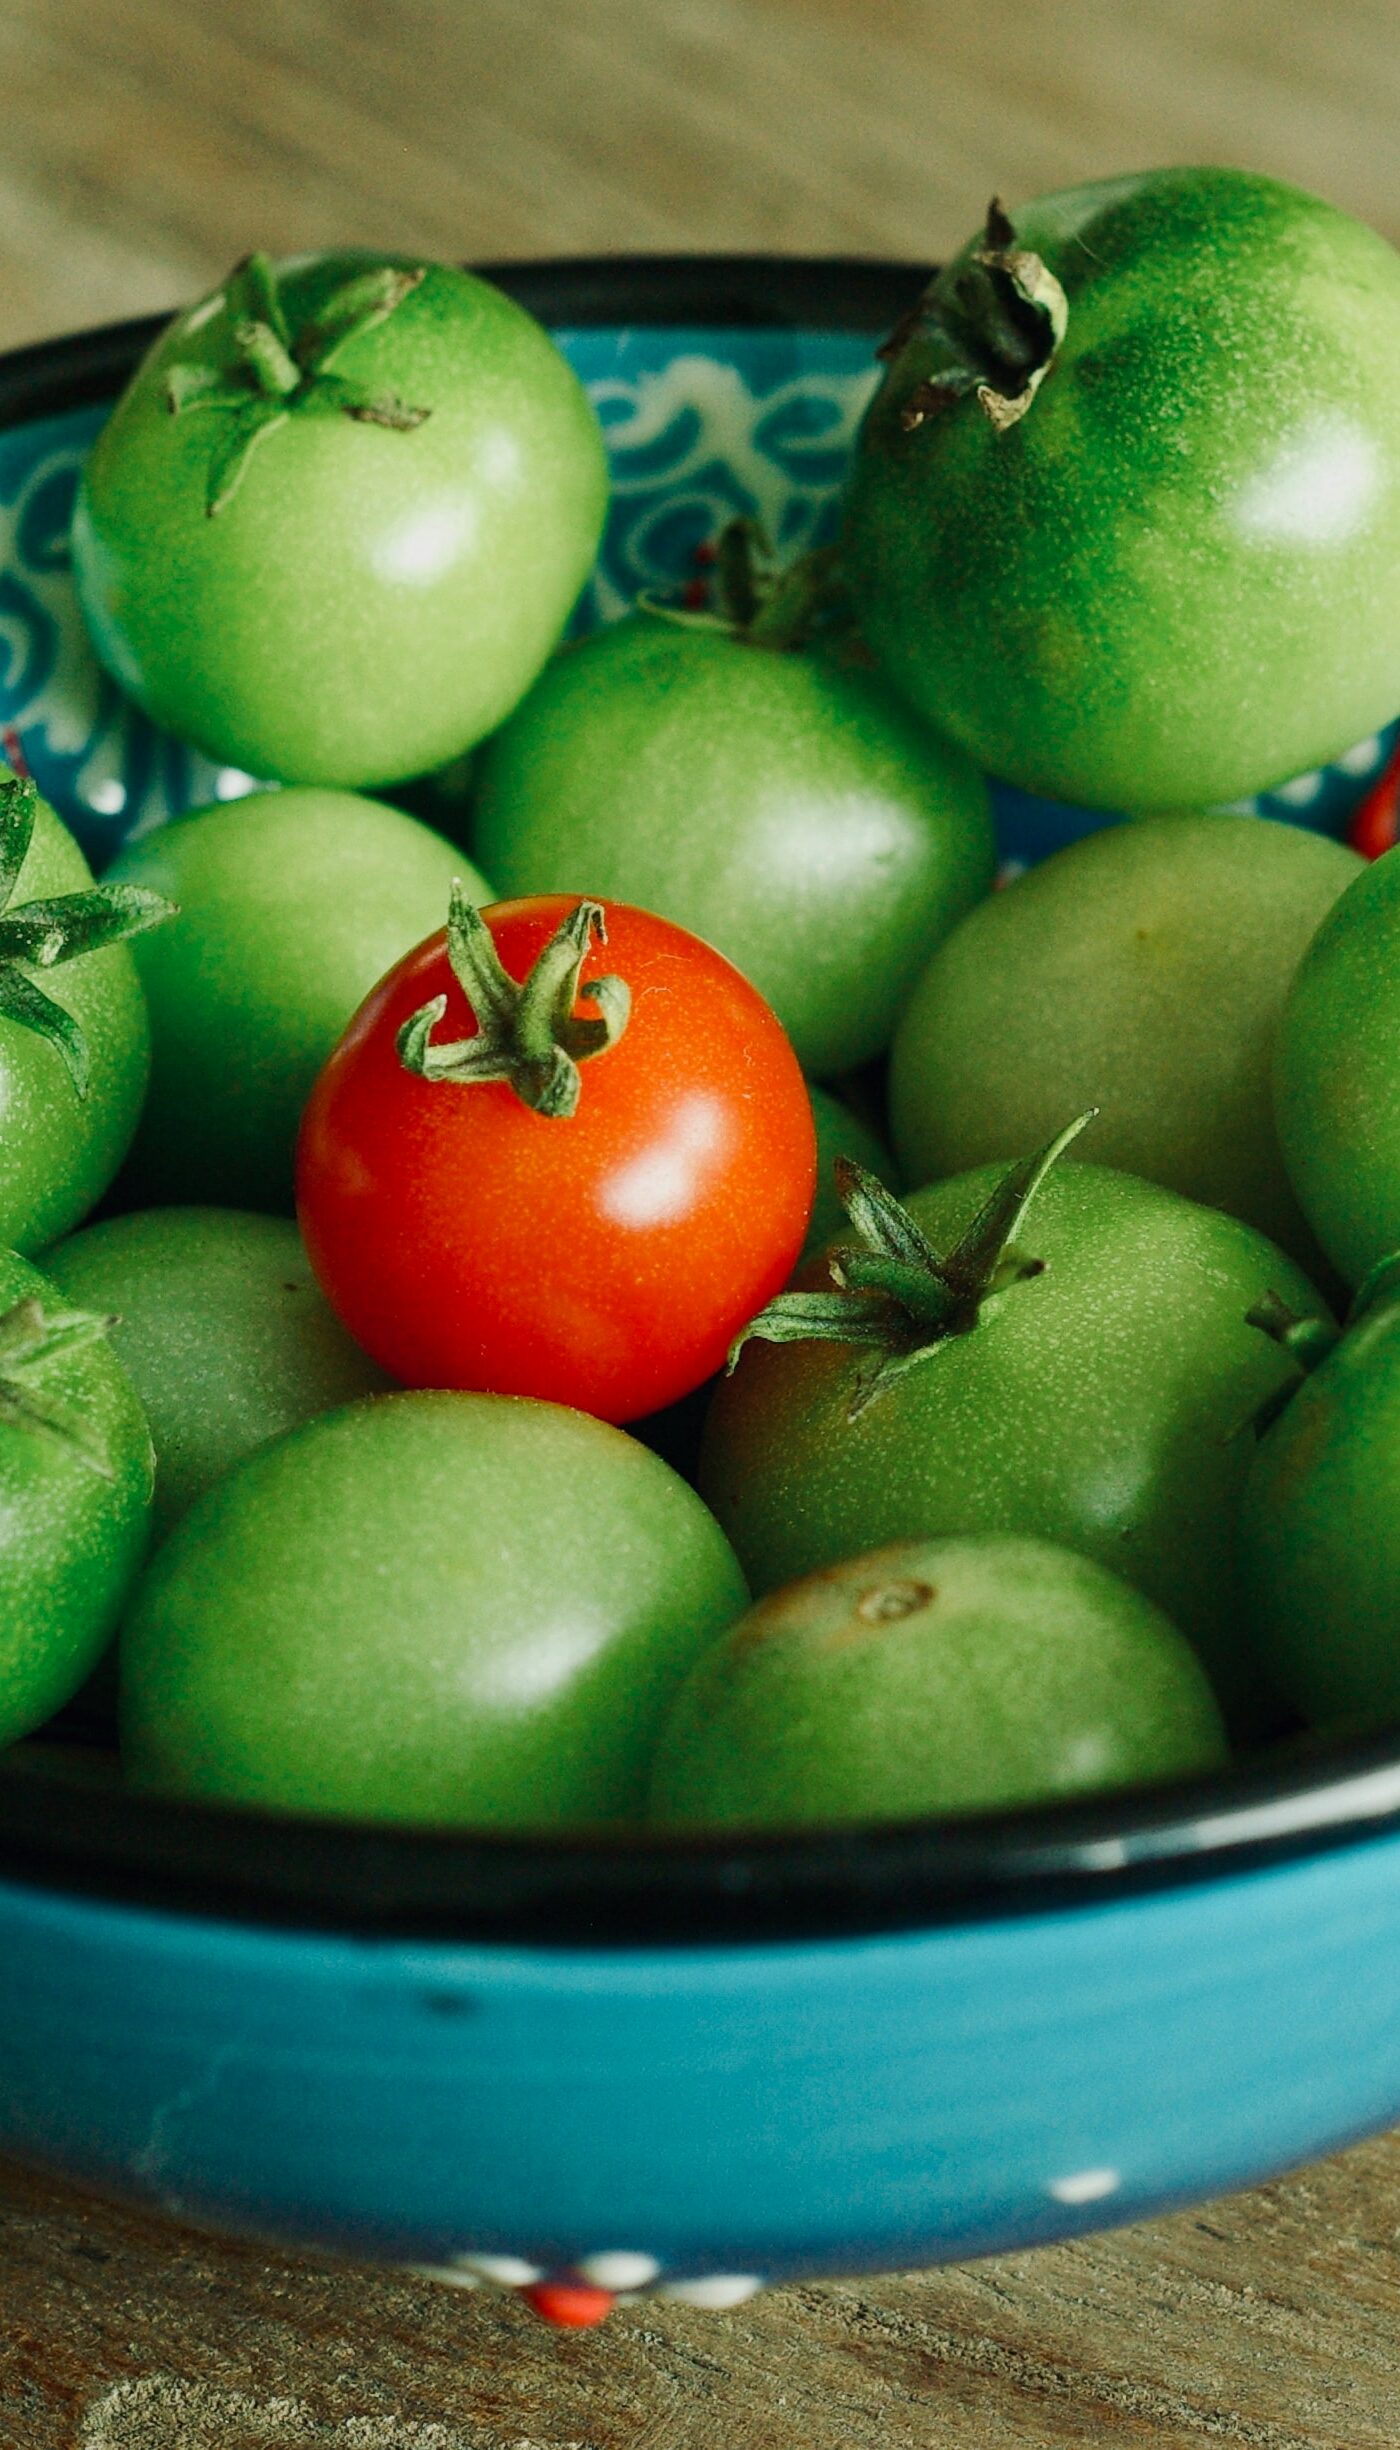 What to Do with Green Tomatoes?